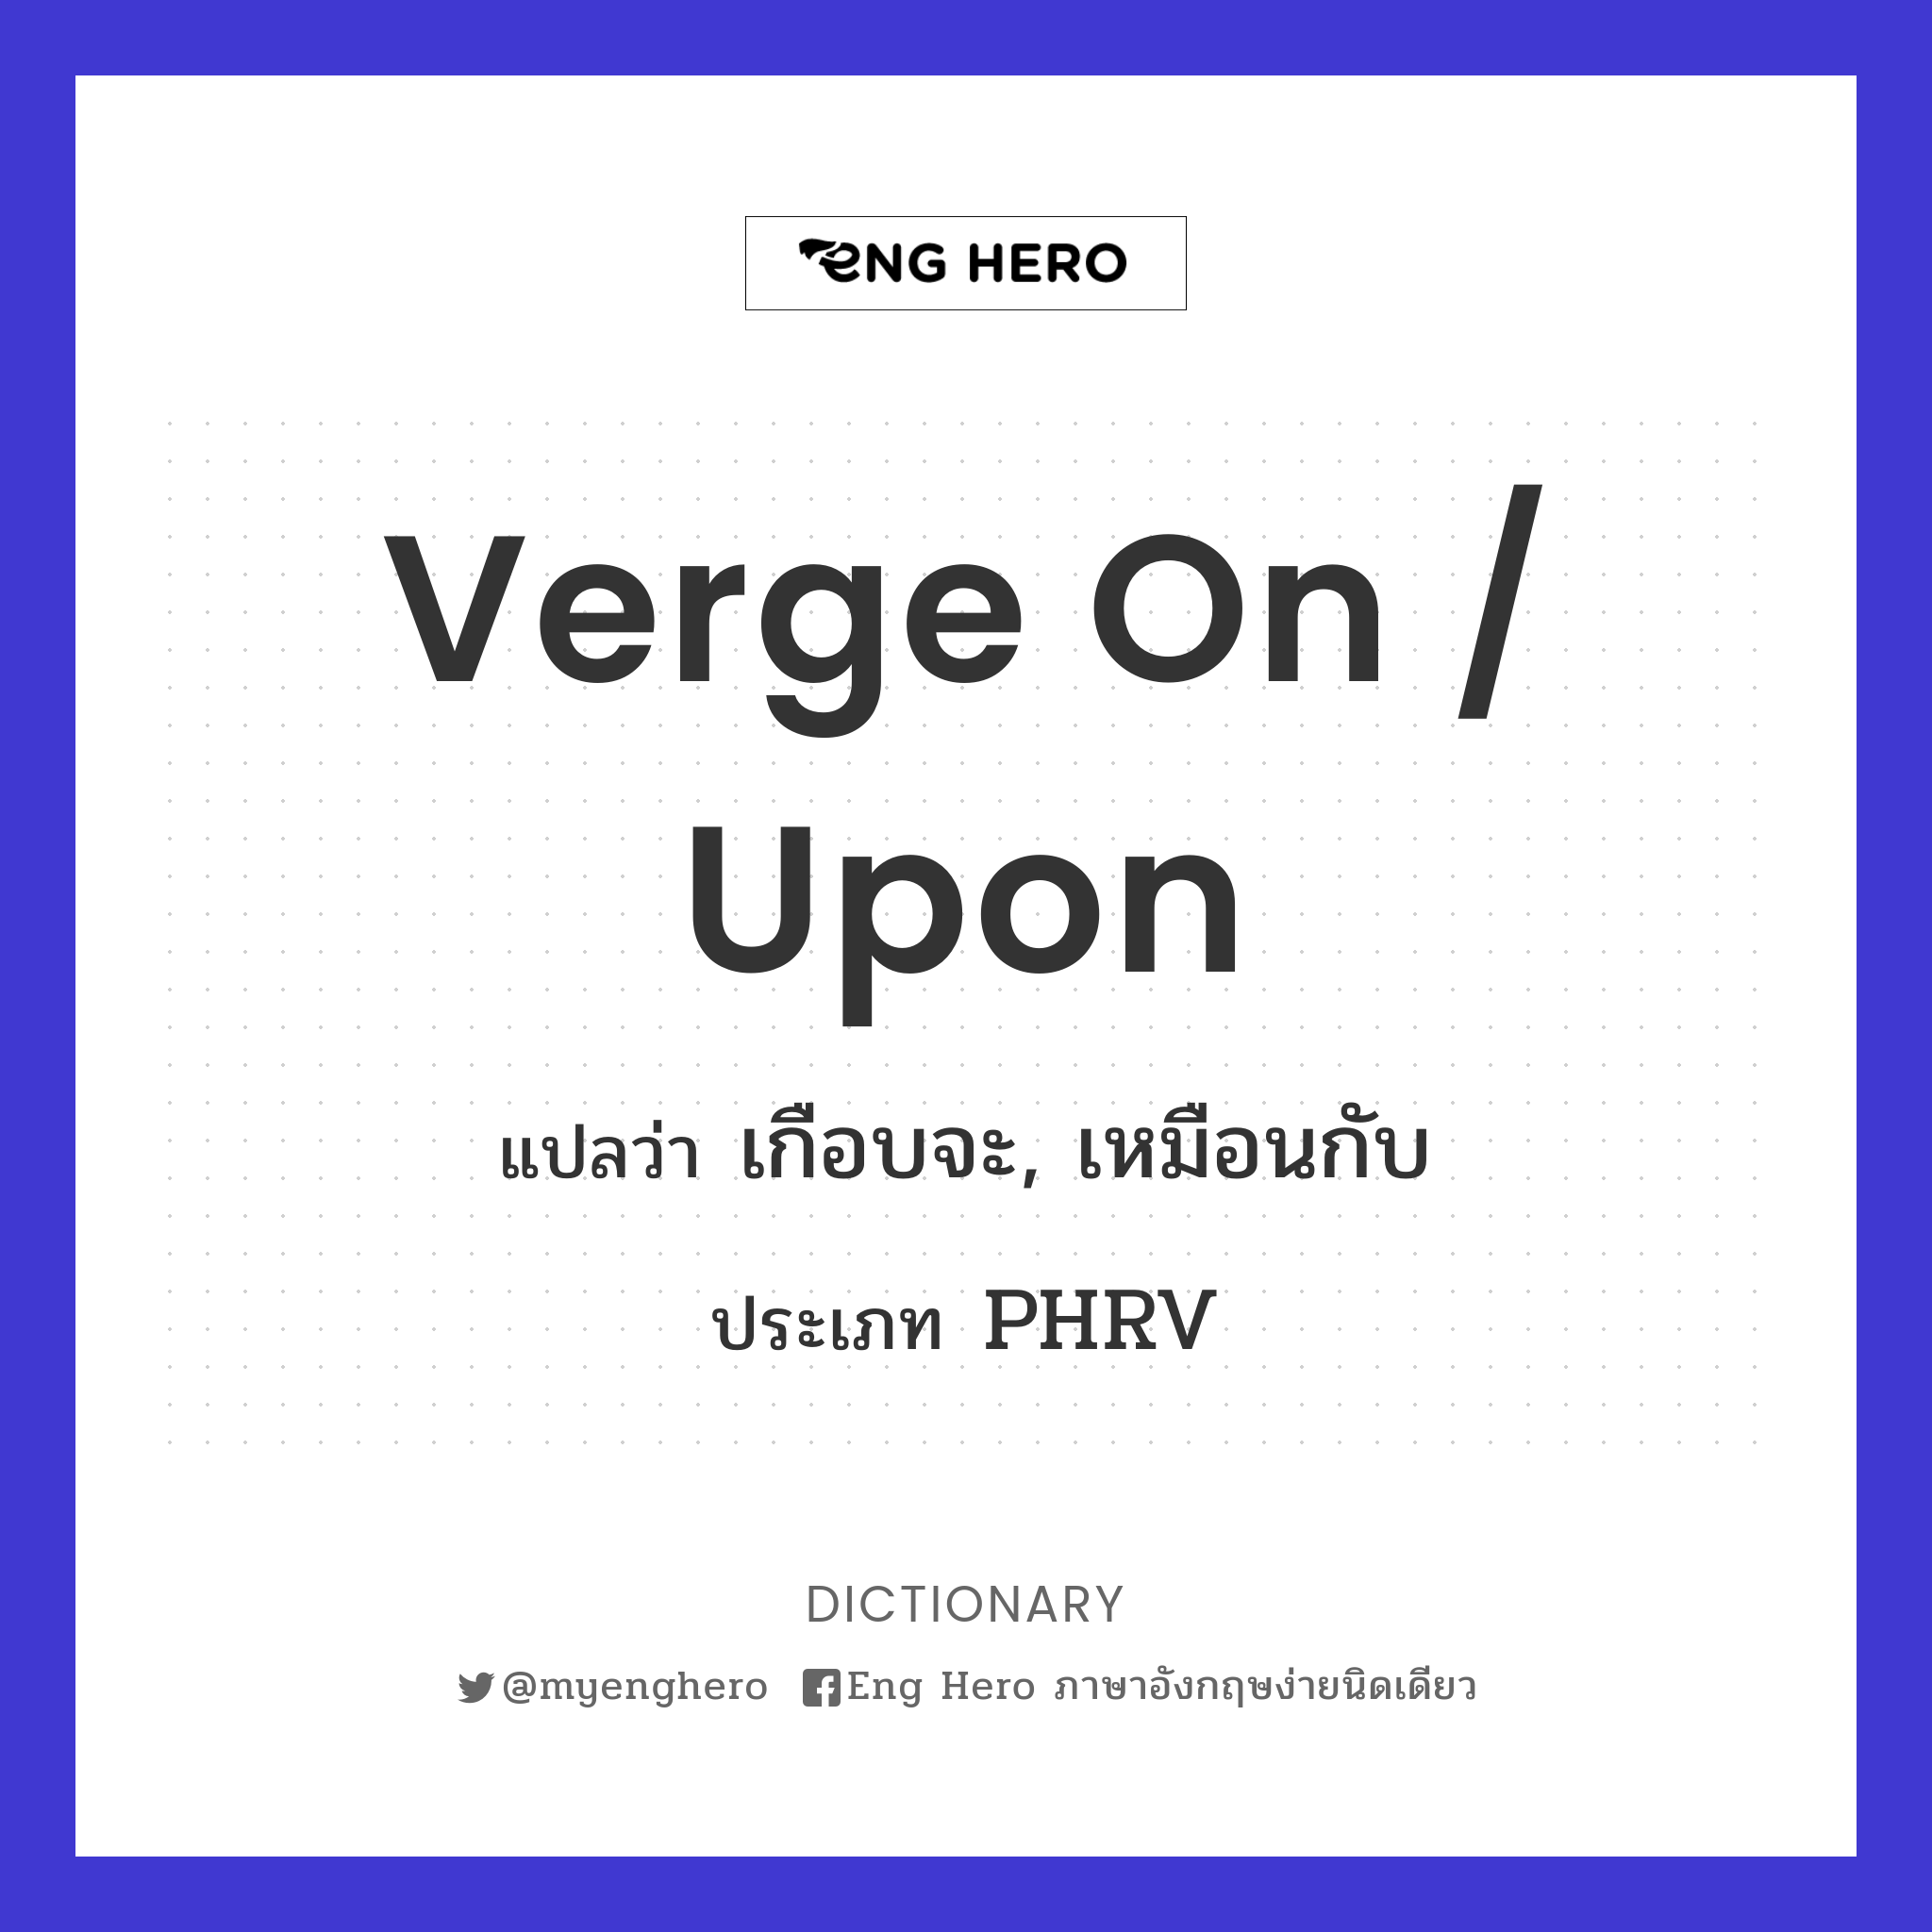 verge on / upon